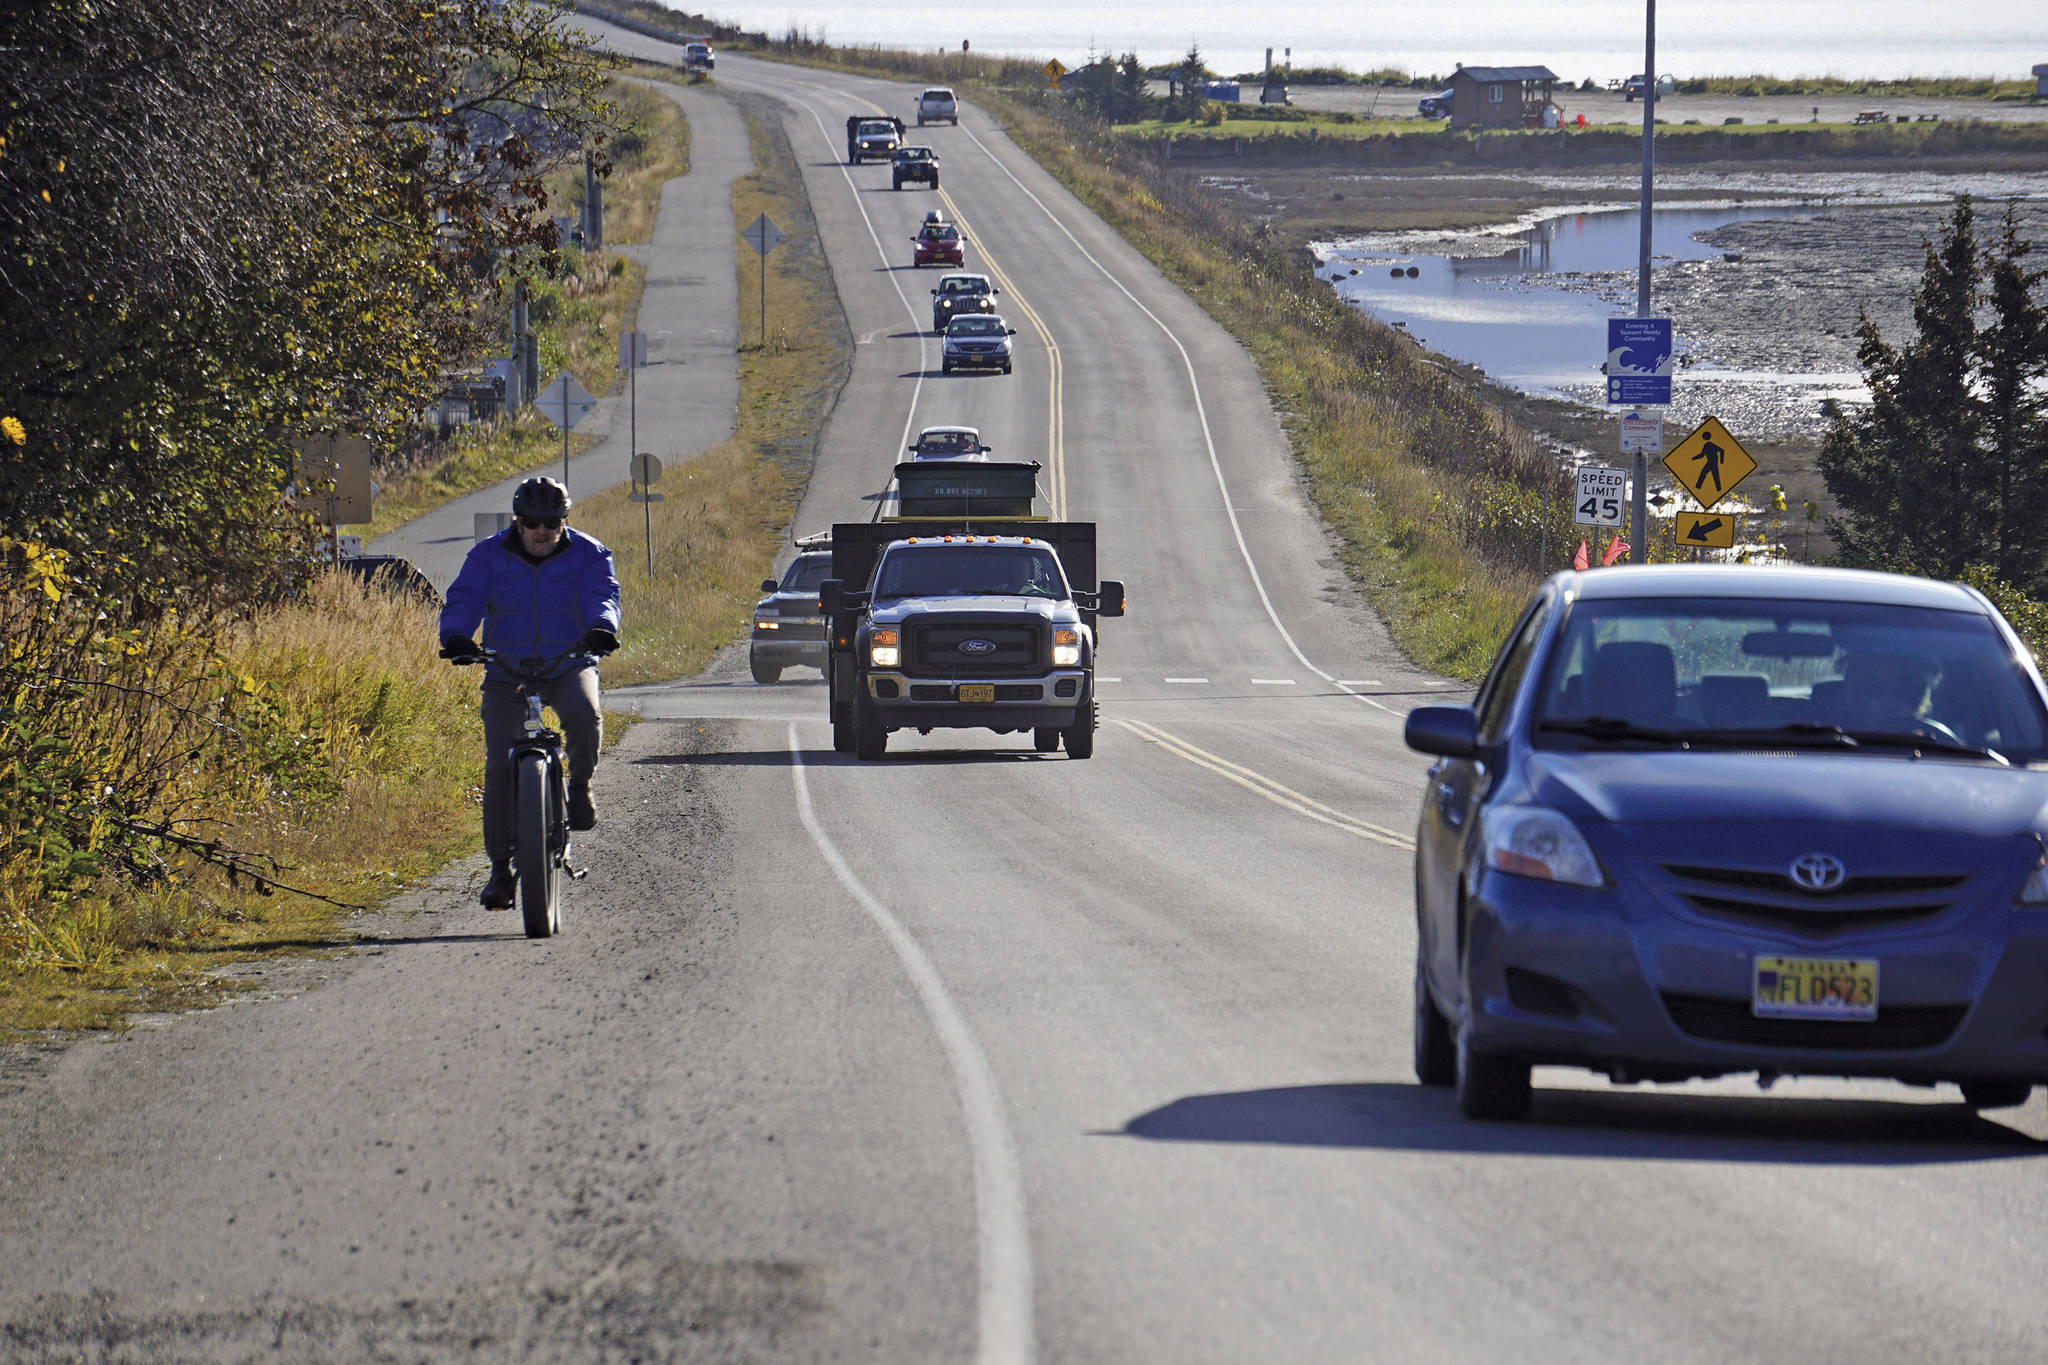 A biker leads a line of cars driving off the Homer Spit at about on Monday, Oct. 19, 2020, in Homer, Alaska after a tsunami evacuation order was issued for low-lying areas in Homer. (Michael Armstrong / Homer News)